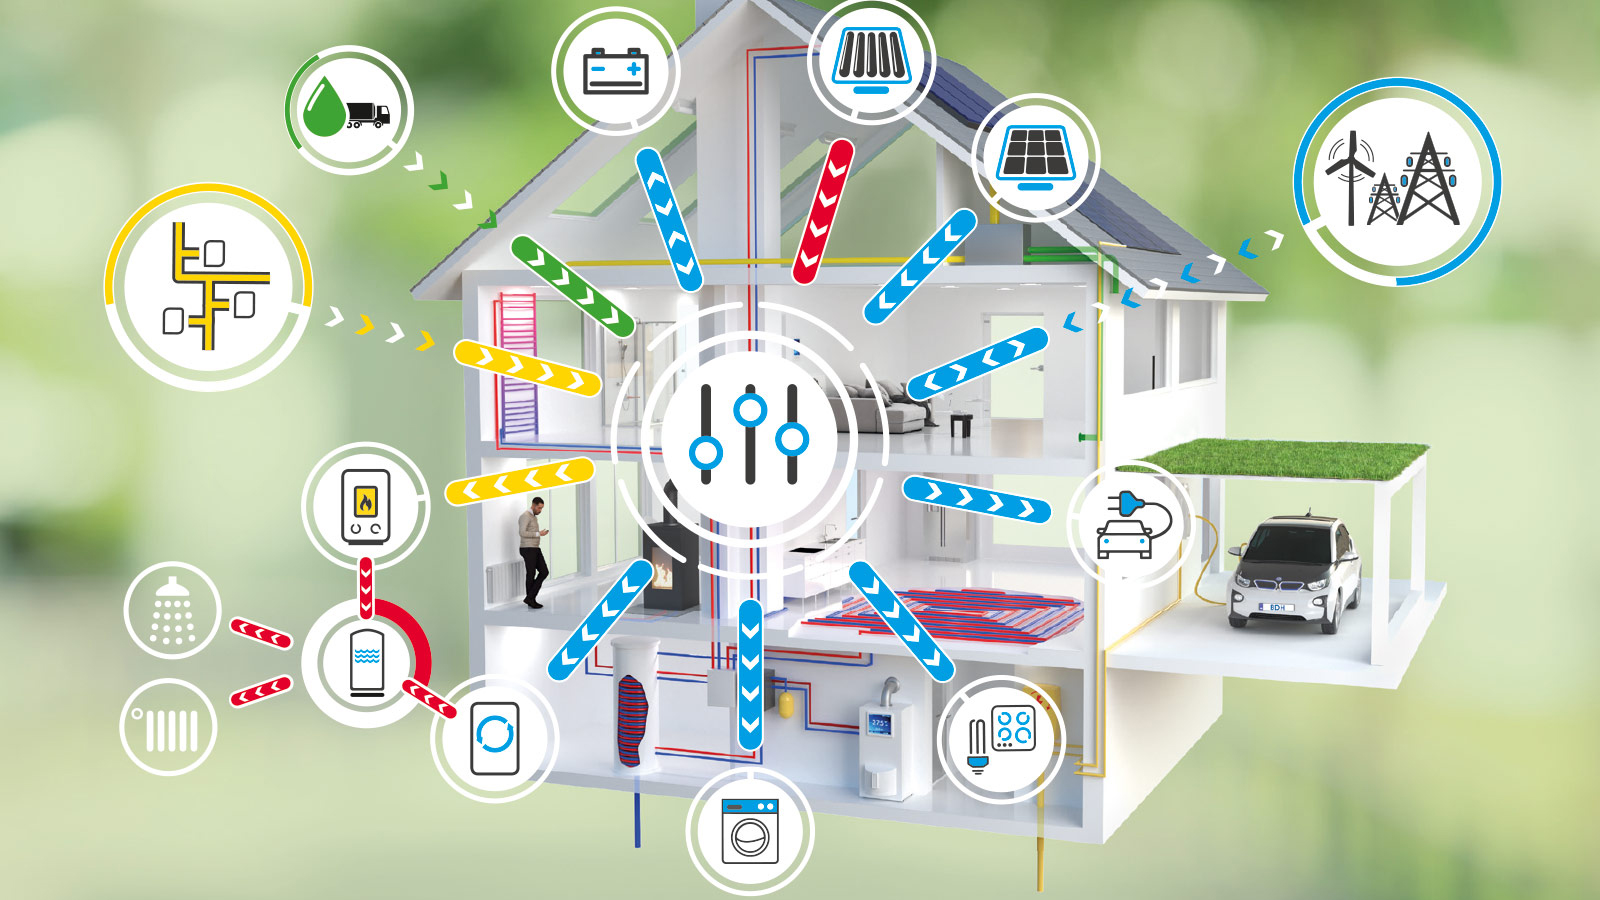 Networking of energy-related products with an intelligent energy management system (EMS)